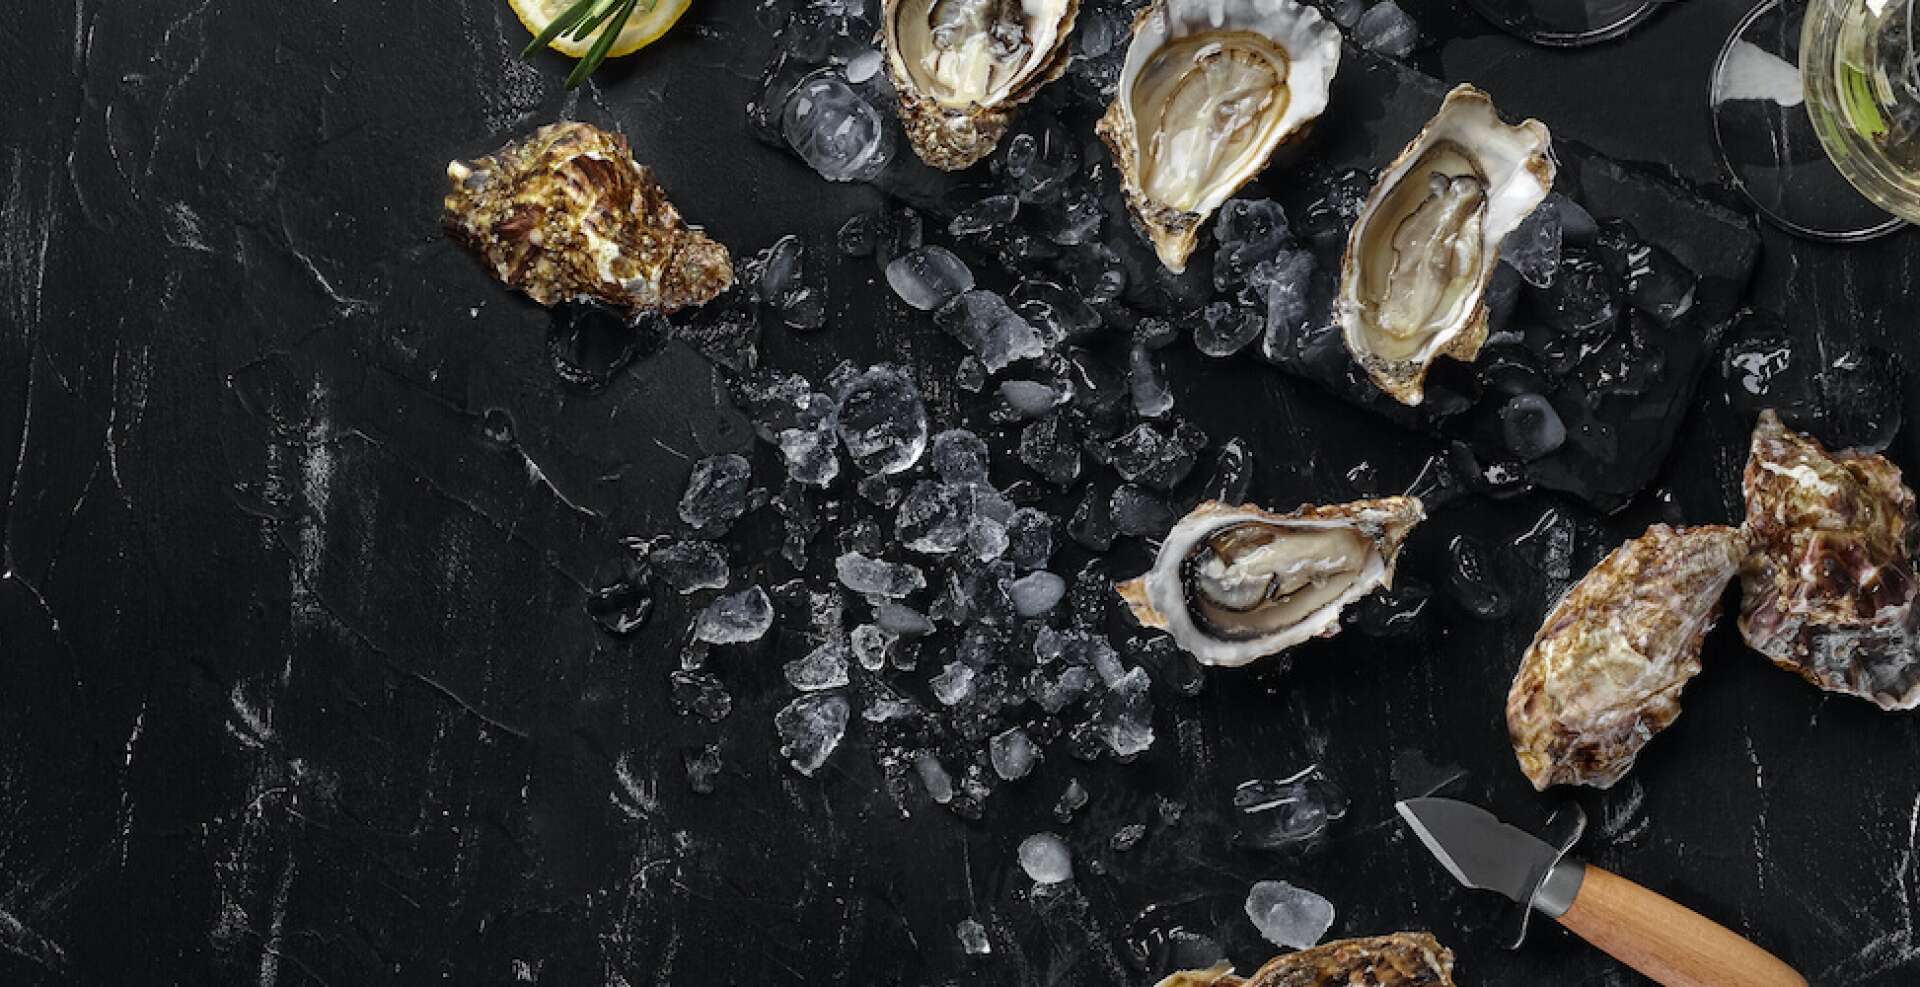 Stay + Shuck at the 2022 Tofino Oyster Fest